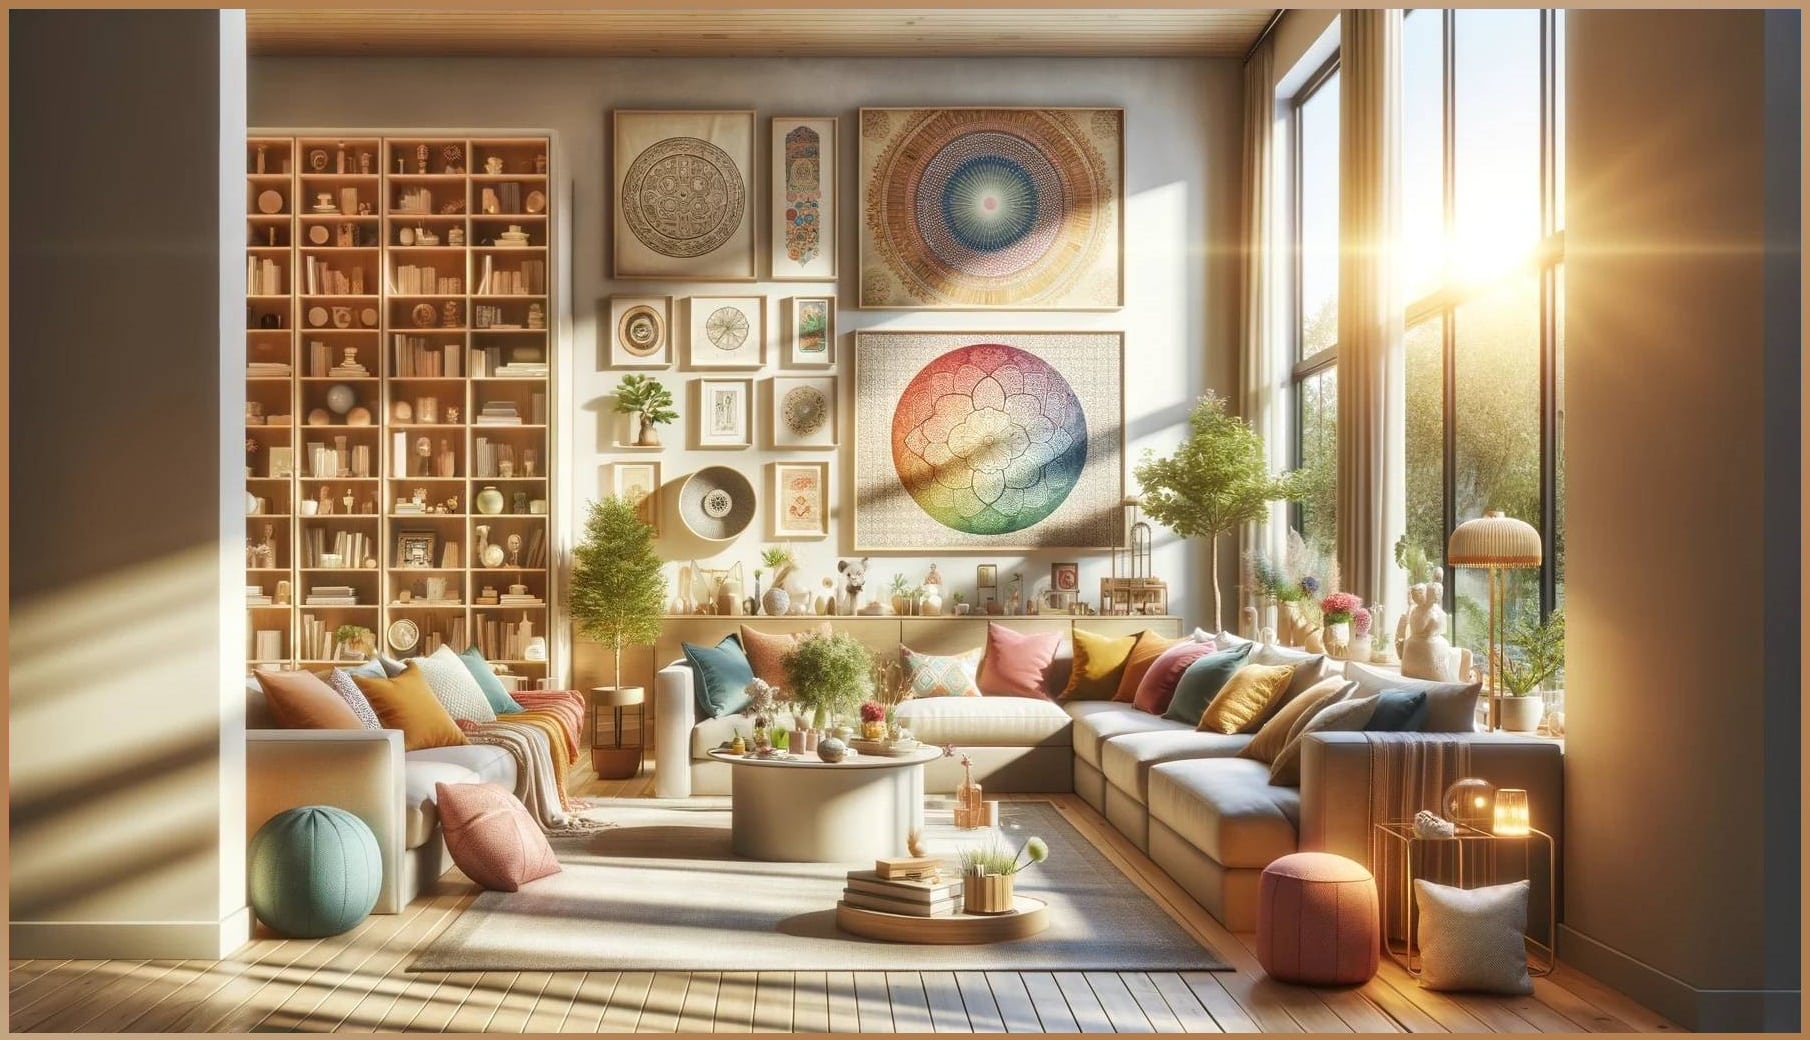 Cozy, sunlit living room designed with Feng Shui principles to bring positive energy into the home, featuring comfortable seating and a variety of personal decor.